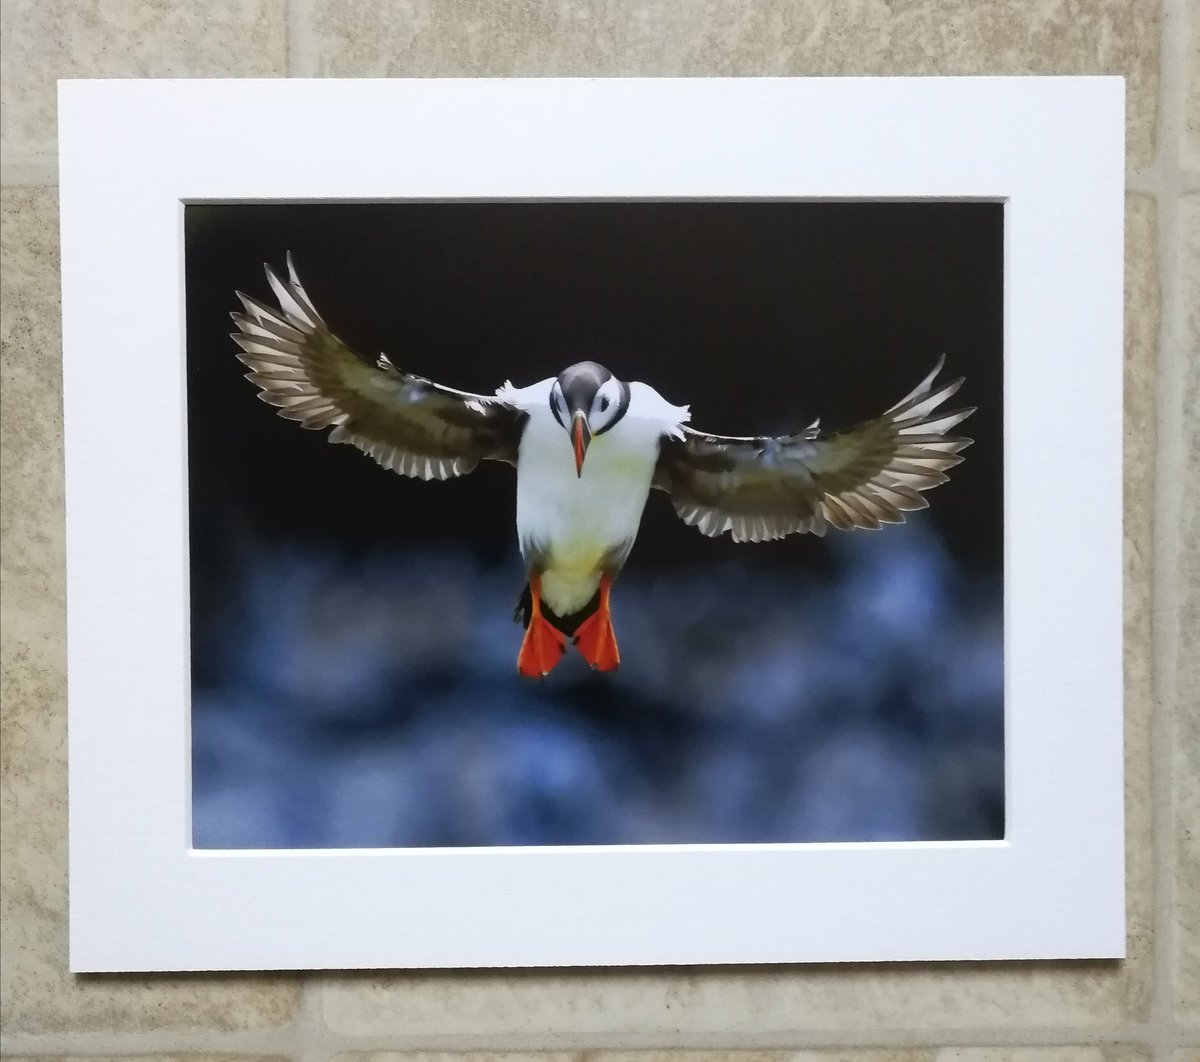 'Angel Puffin' - 10x8 mounted print. You can buy it here; https://www.carlbovis.com/product-page/angel-puffin-10x8-mounted-print 